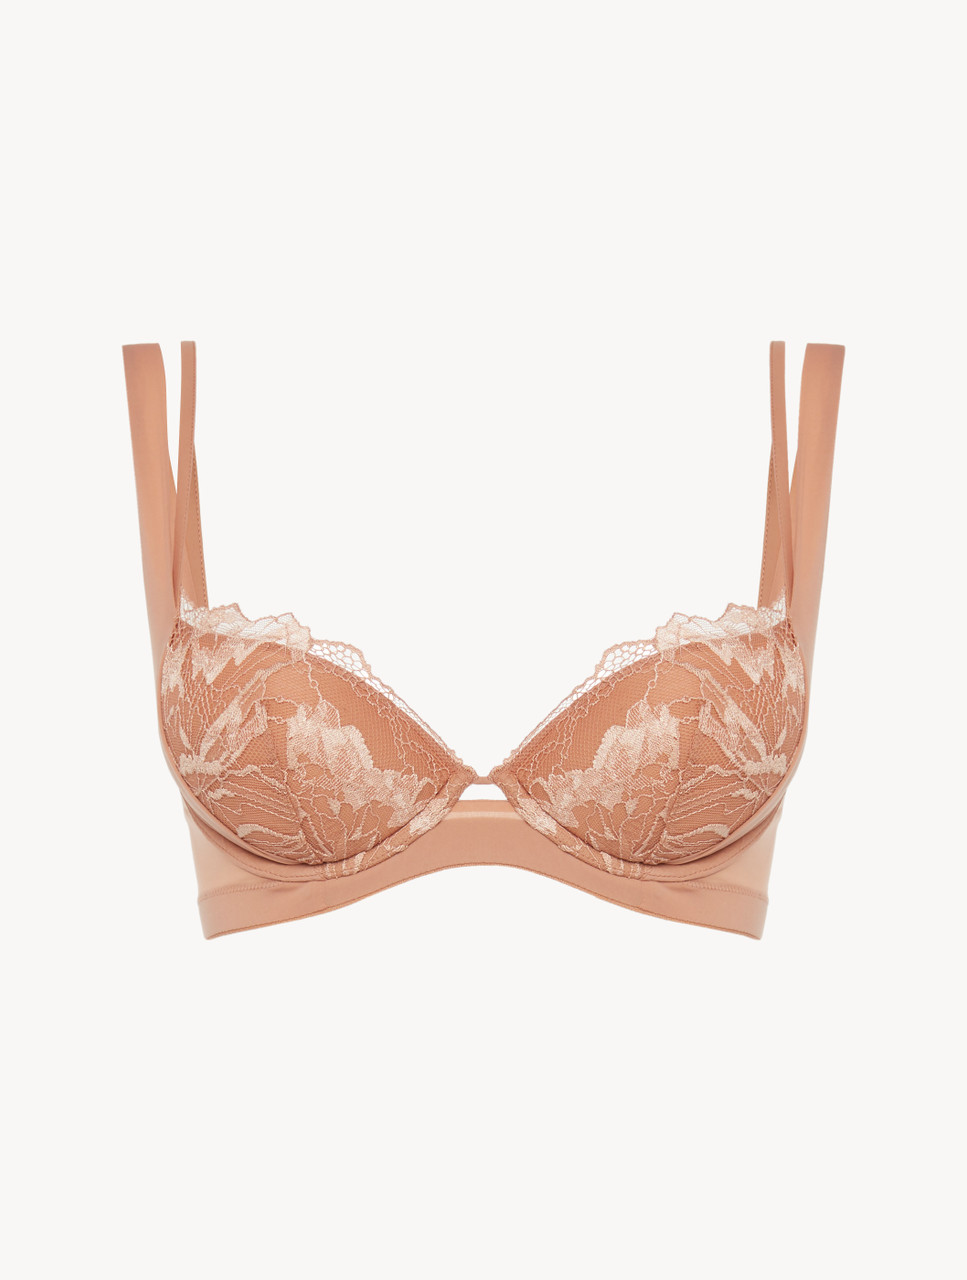 Push-up bra in biscuit with French Leavers lace - ONLINE EXCLUSIVE